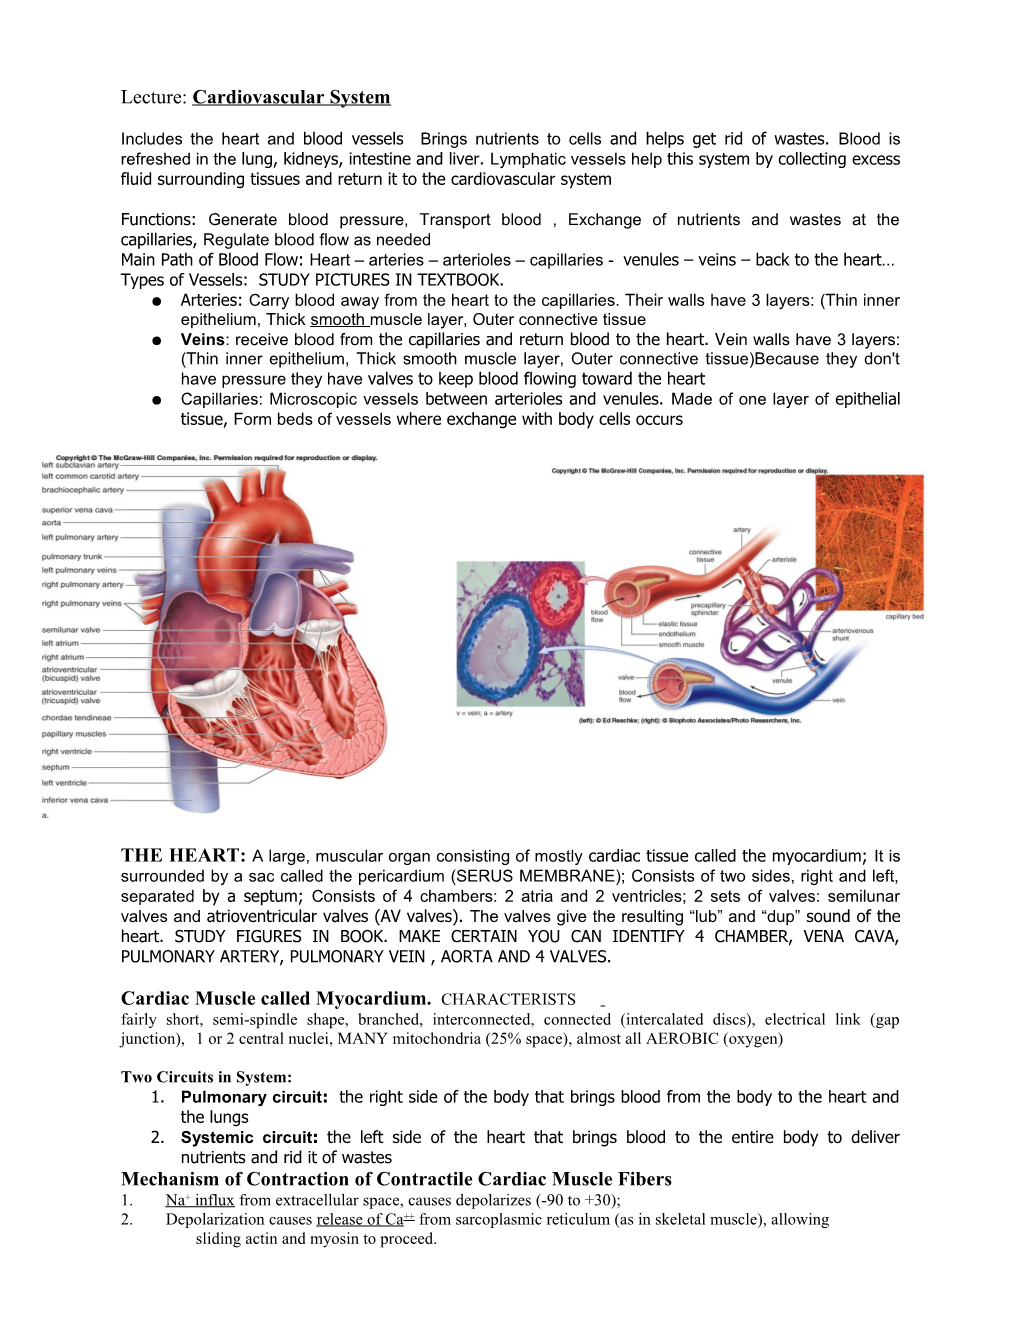 Lecture: Cardiovascular System